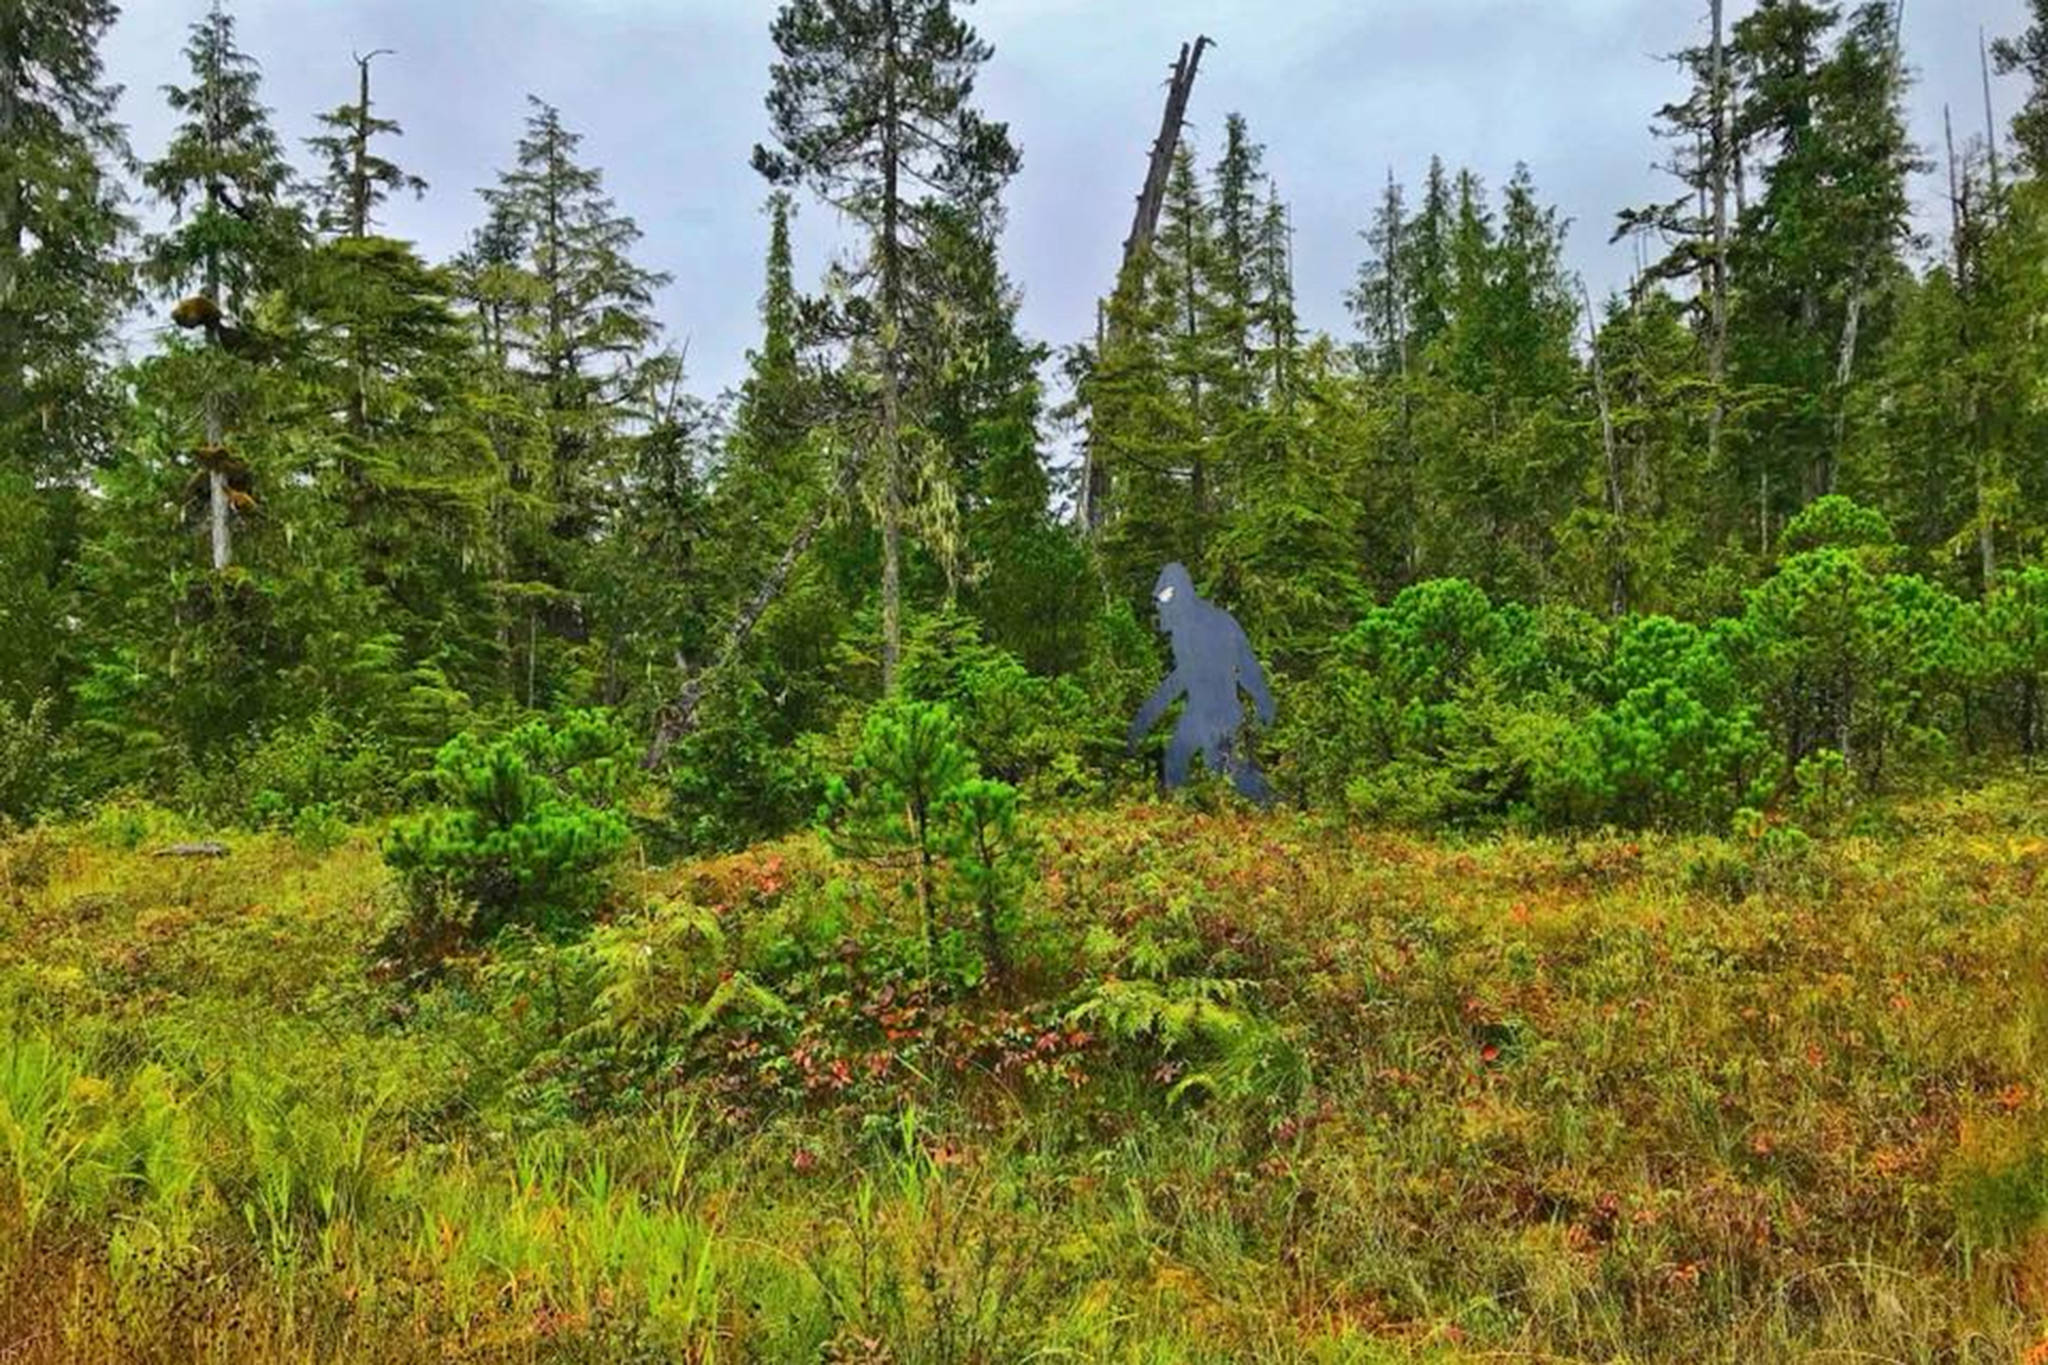 A wooden Big Foot sculpture peers from the distance in Wrangell. (Vivian Faith Prescott | For the Capital City Weekly)